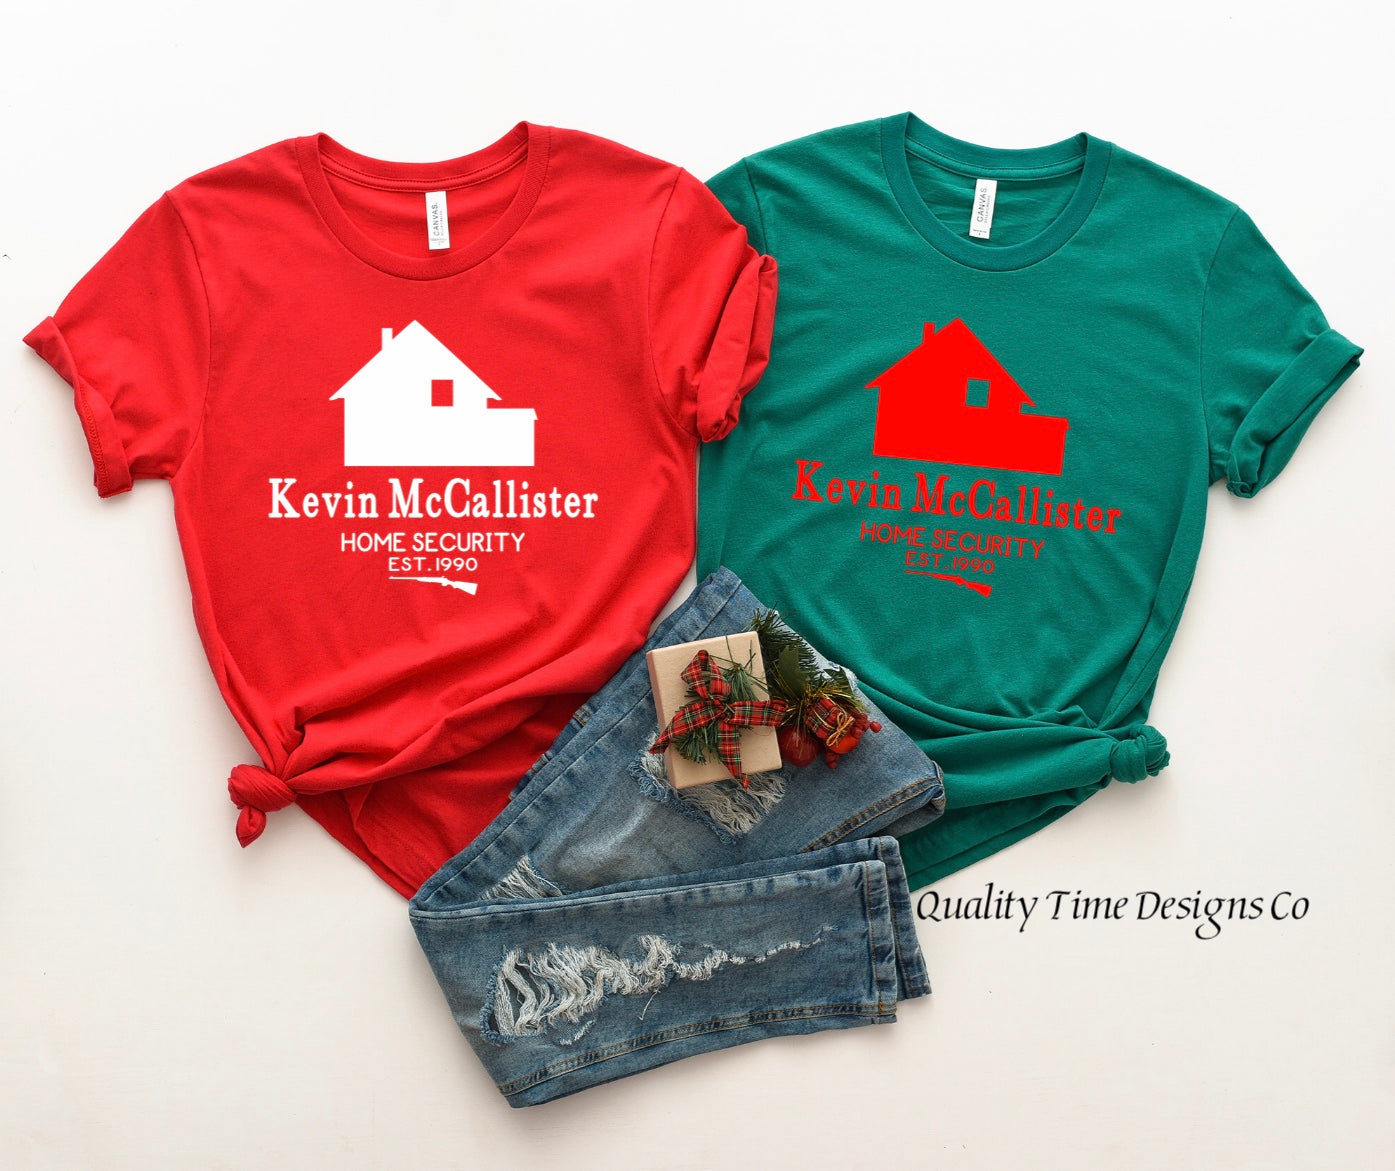 Kevin McCallister Home Security t-shirt 